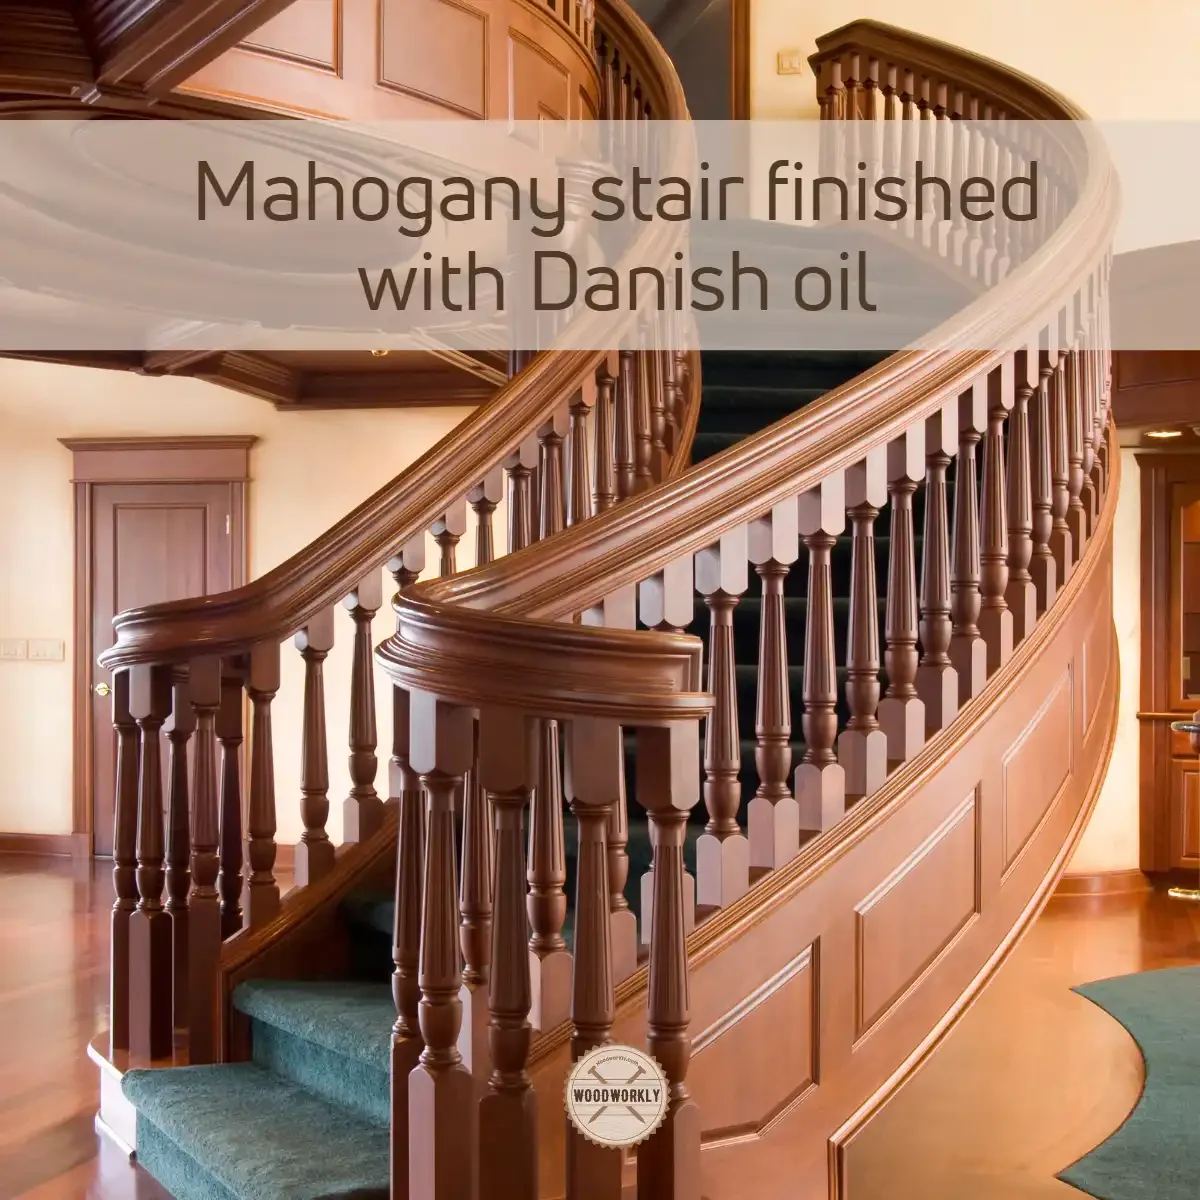 Mahogany stair finished with Danish oil